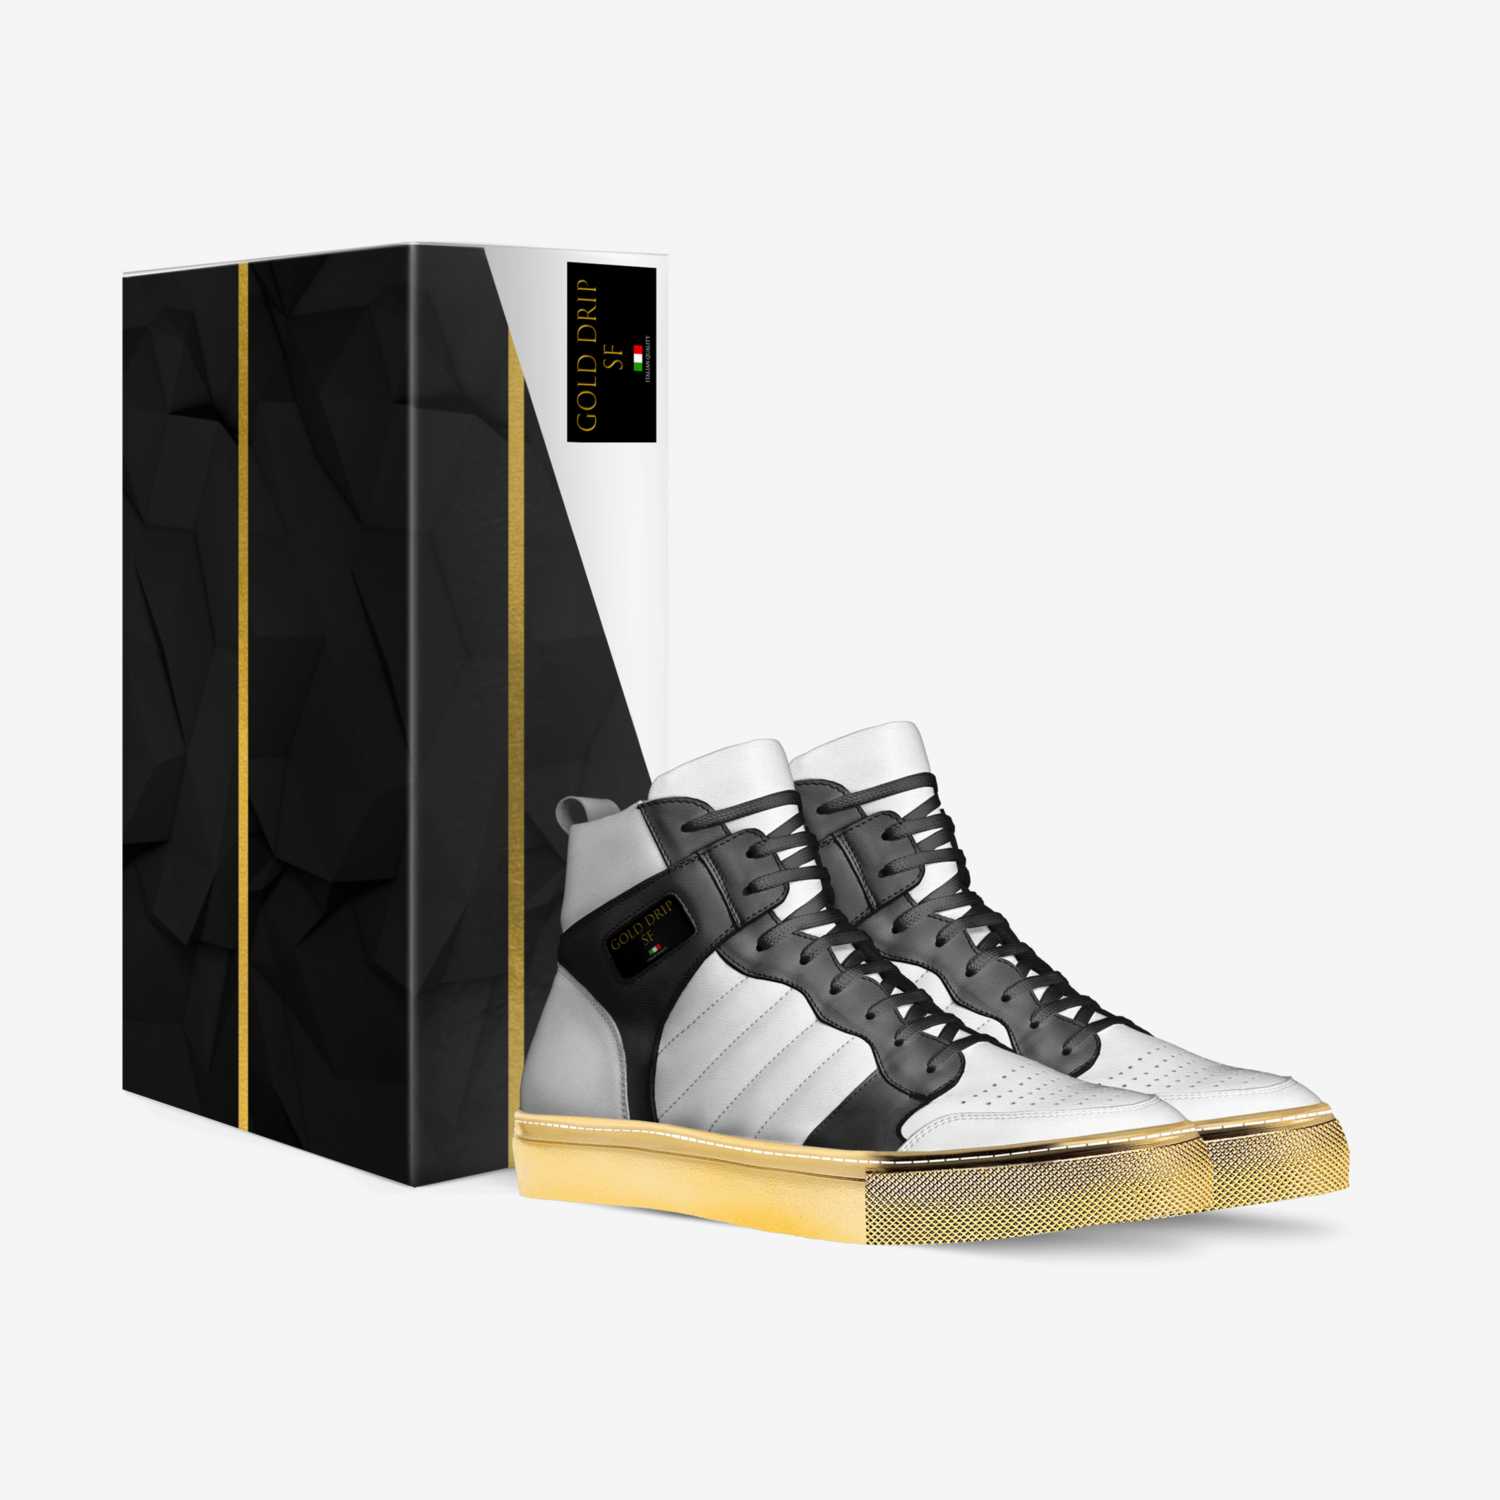 Gold Drip custom made in Italy shoes by Max Fiksdal-pedersen | Box view